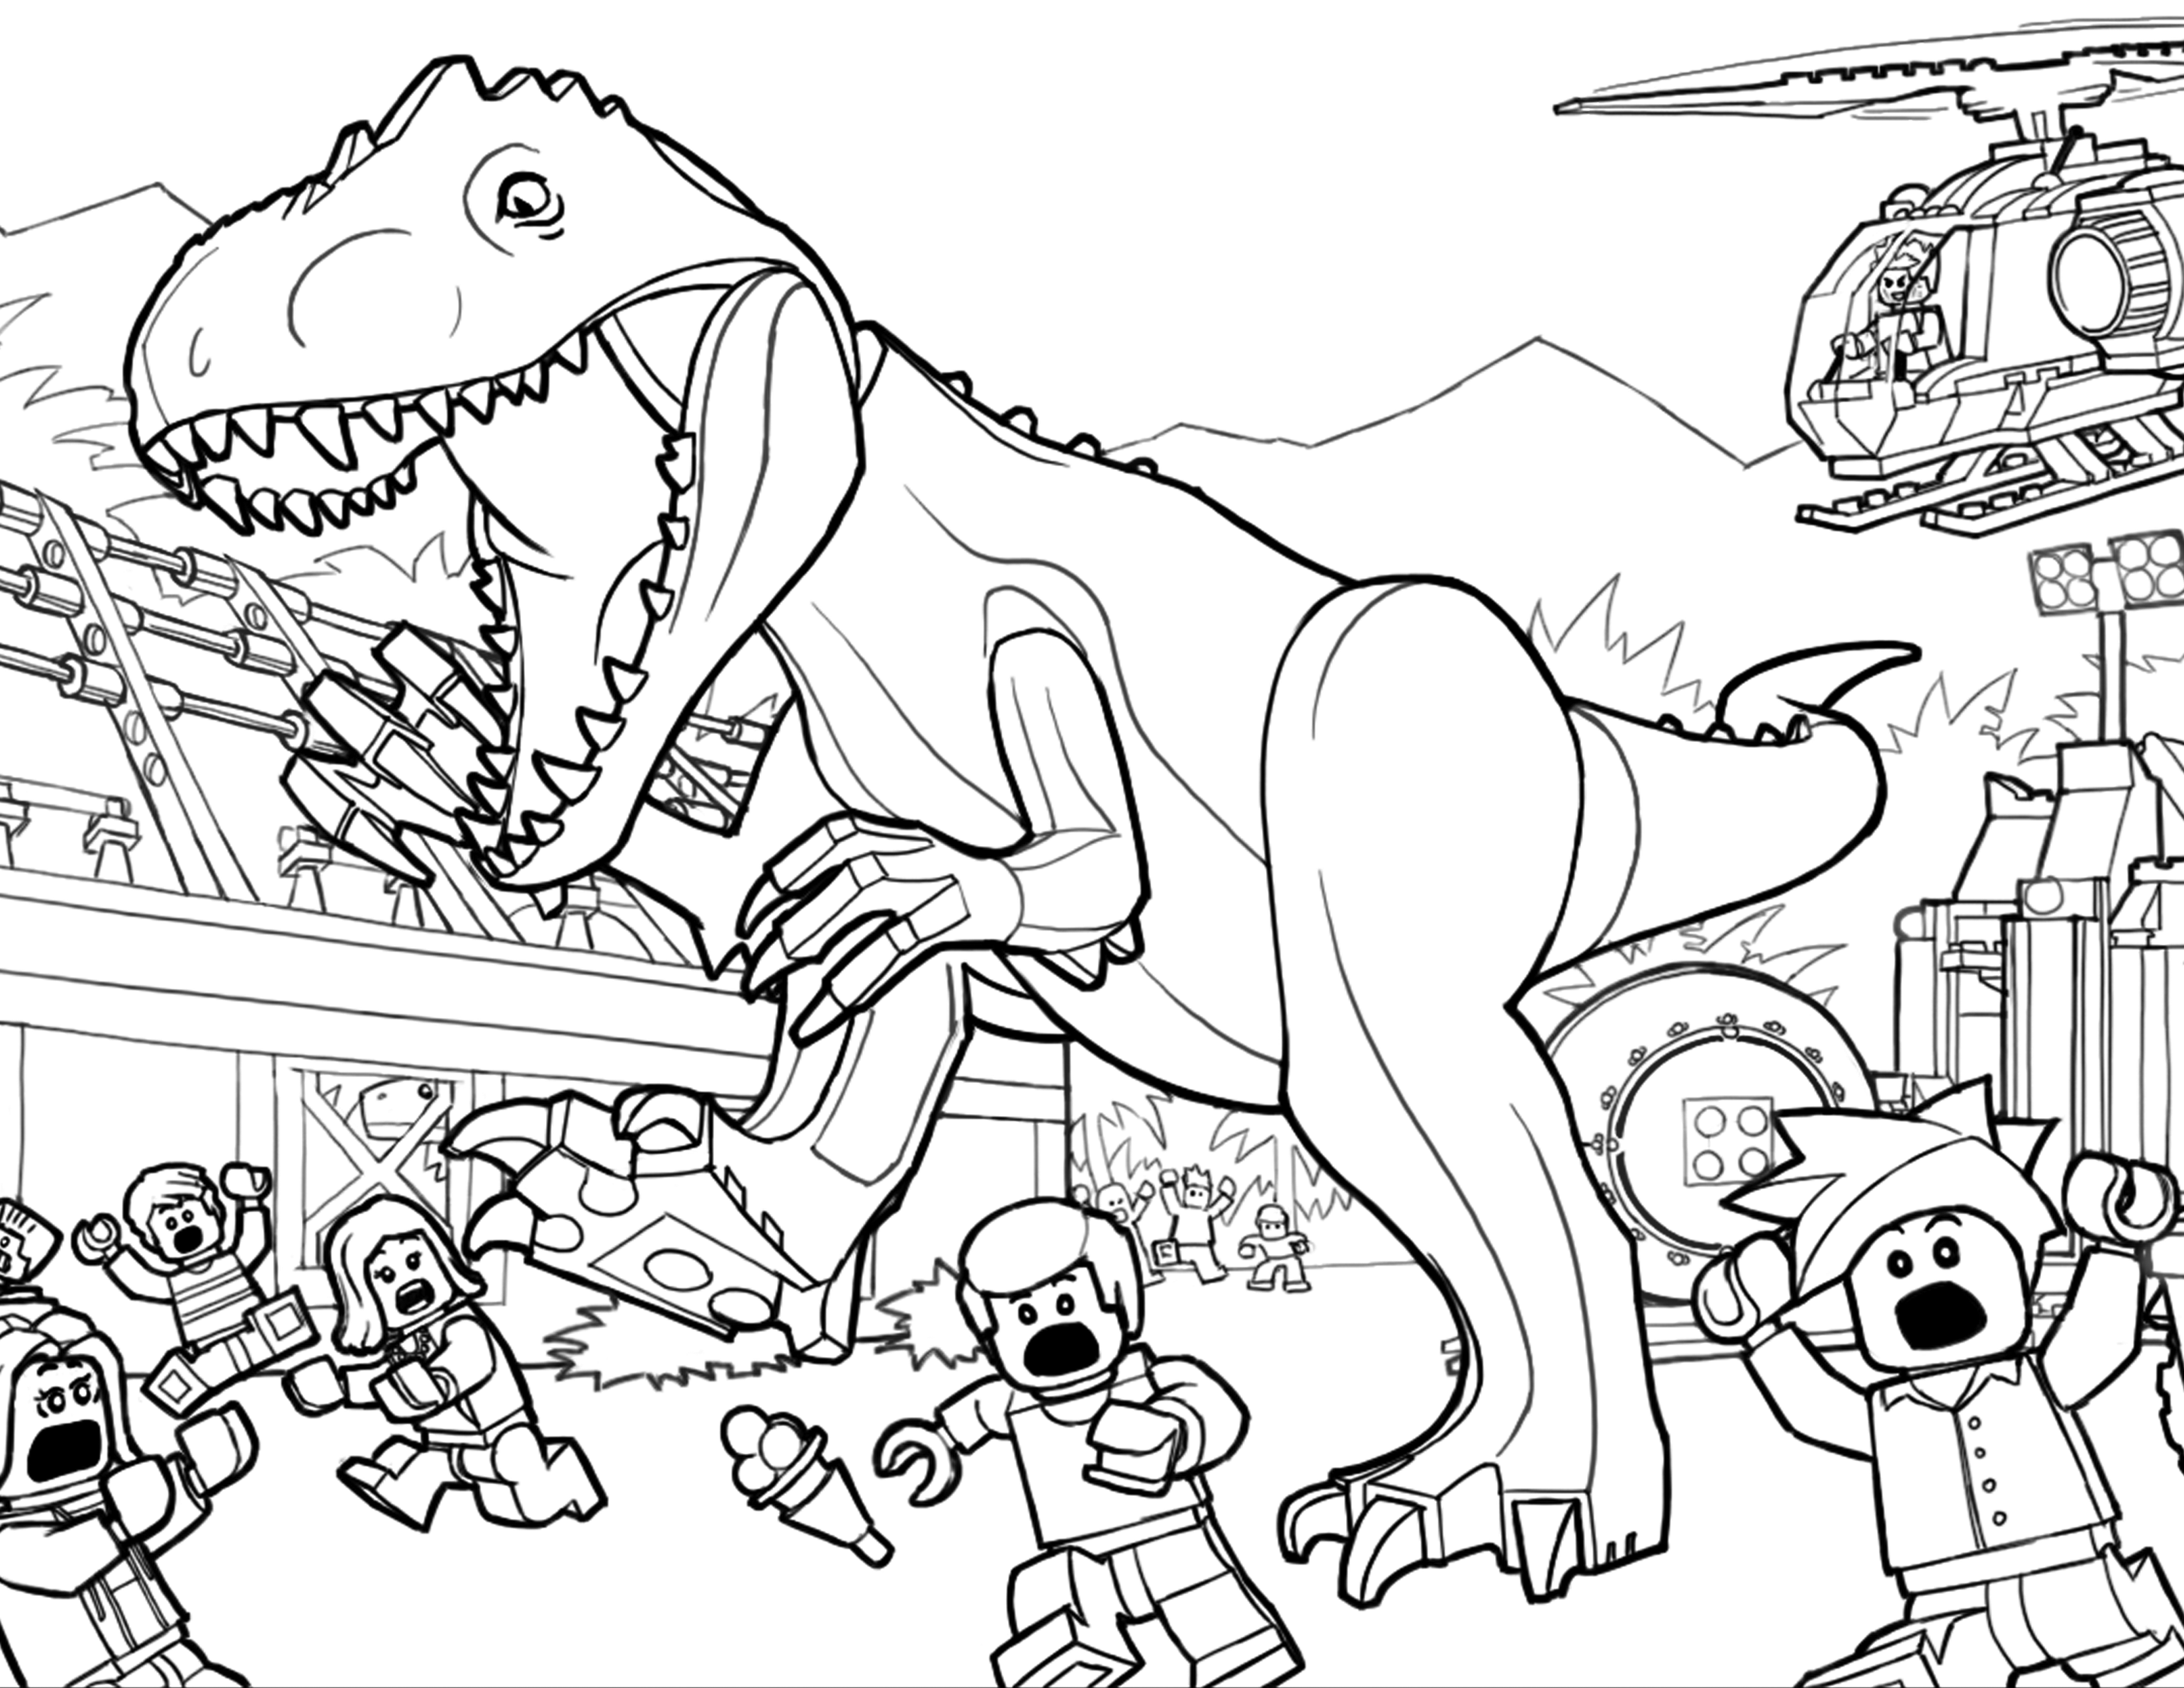 rex coloring page